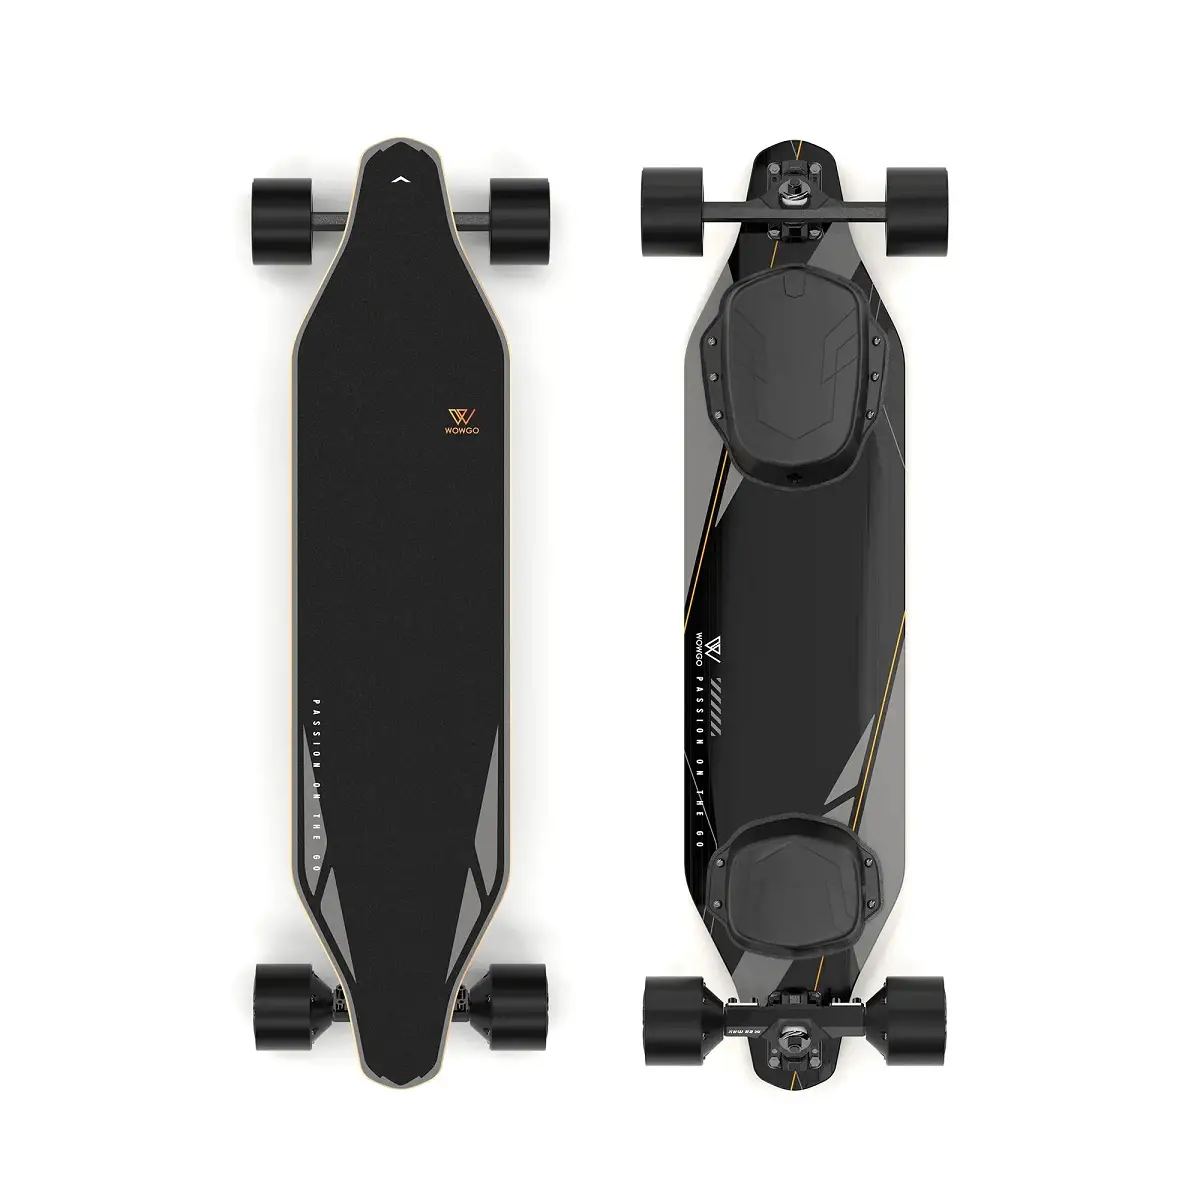 WowGo 2S Max boosted board